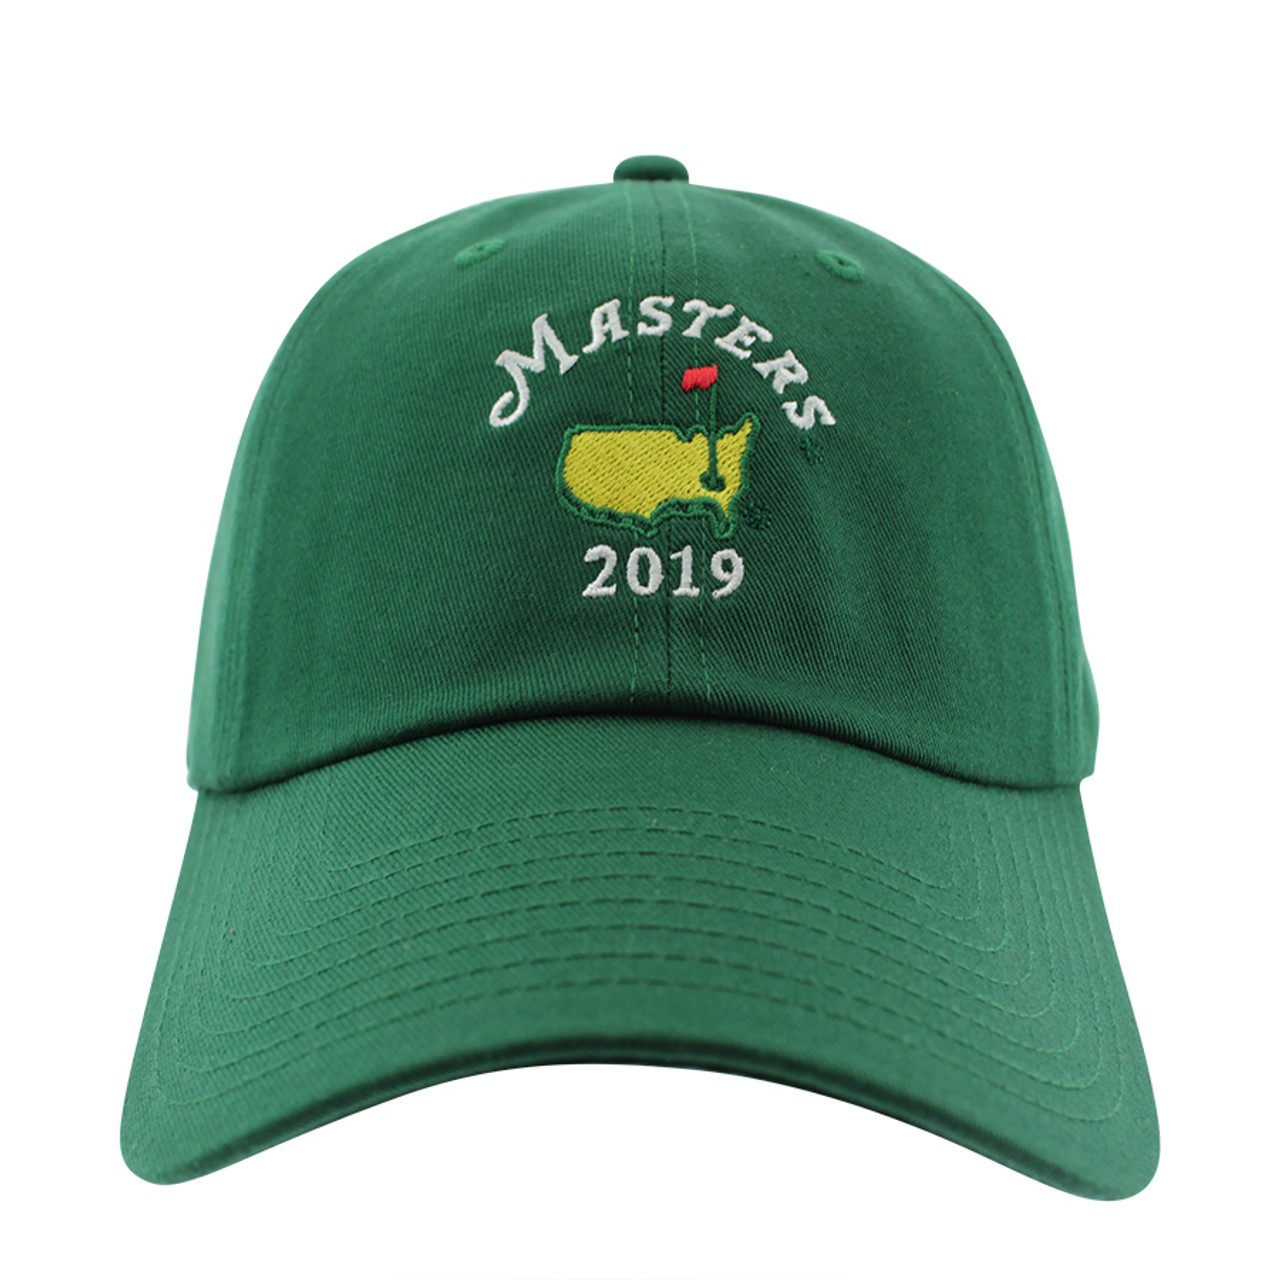 2019_dated_masters_green_caddy_hat_p1724.jpg